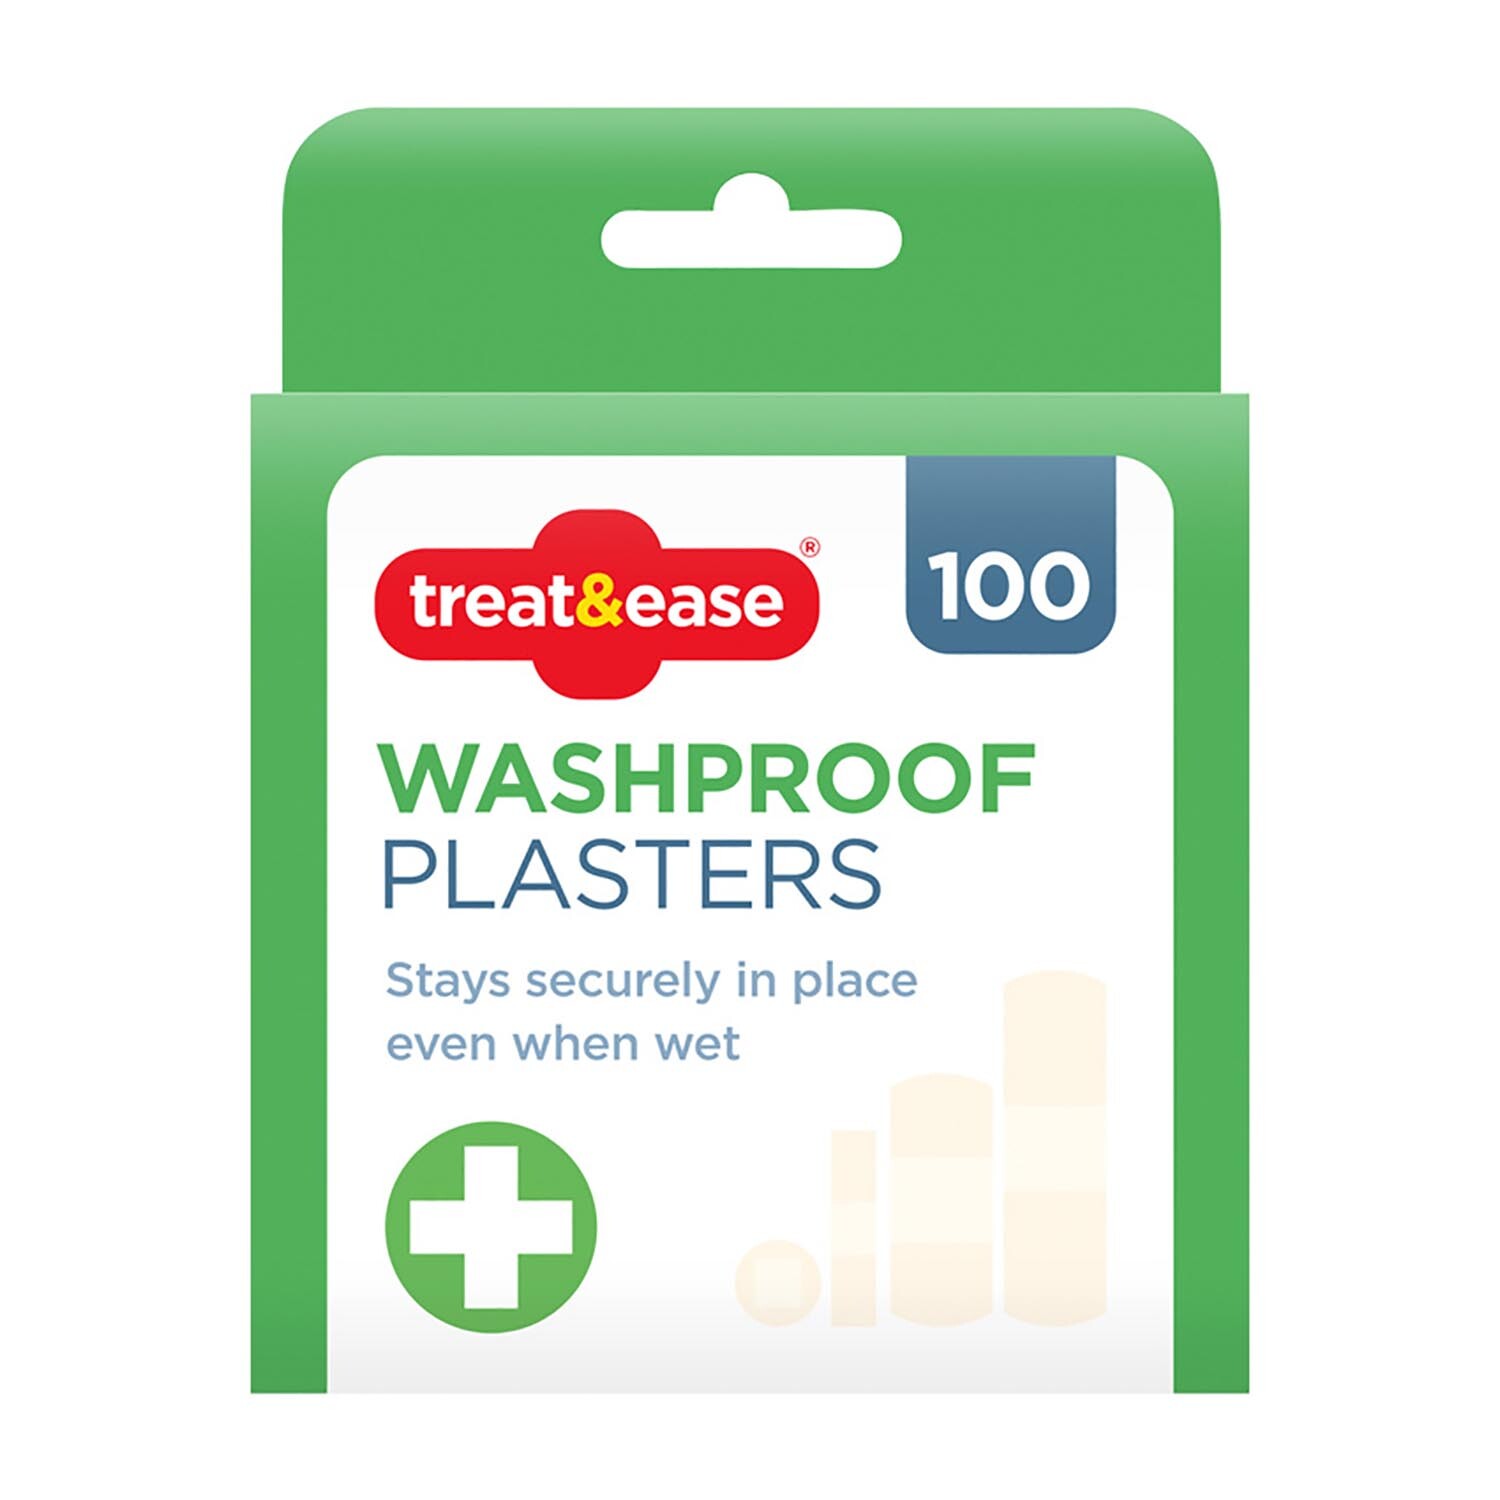 Pack of 100 Washproof Plasters - Green Image